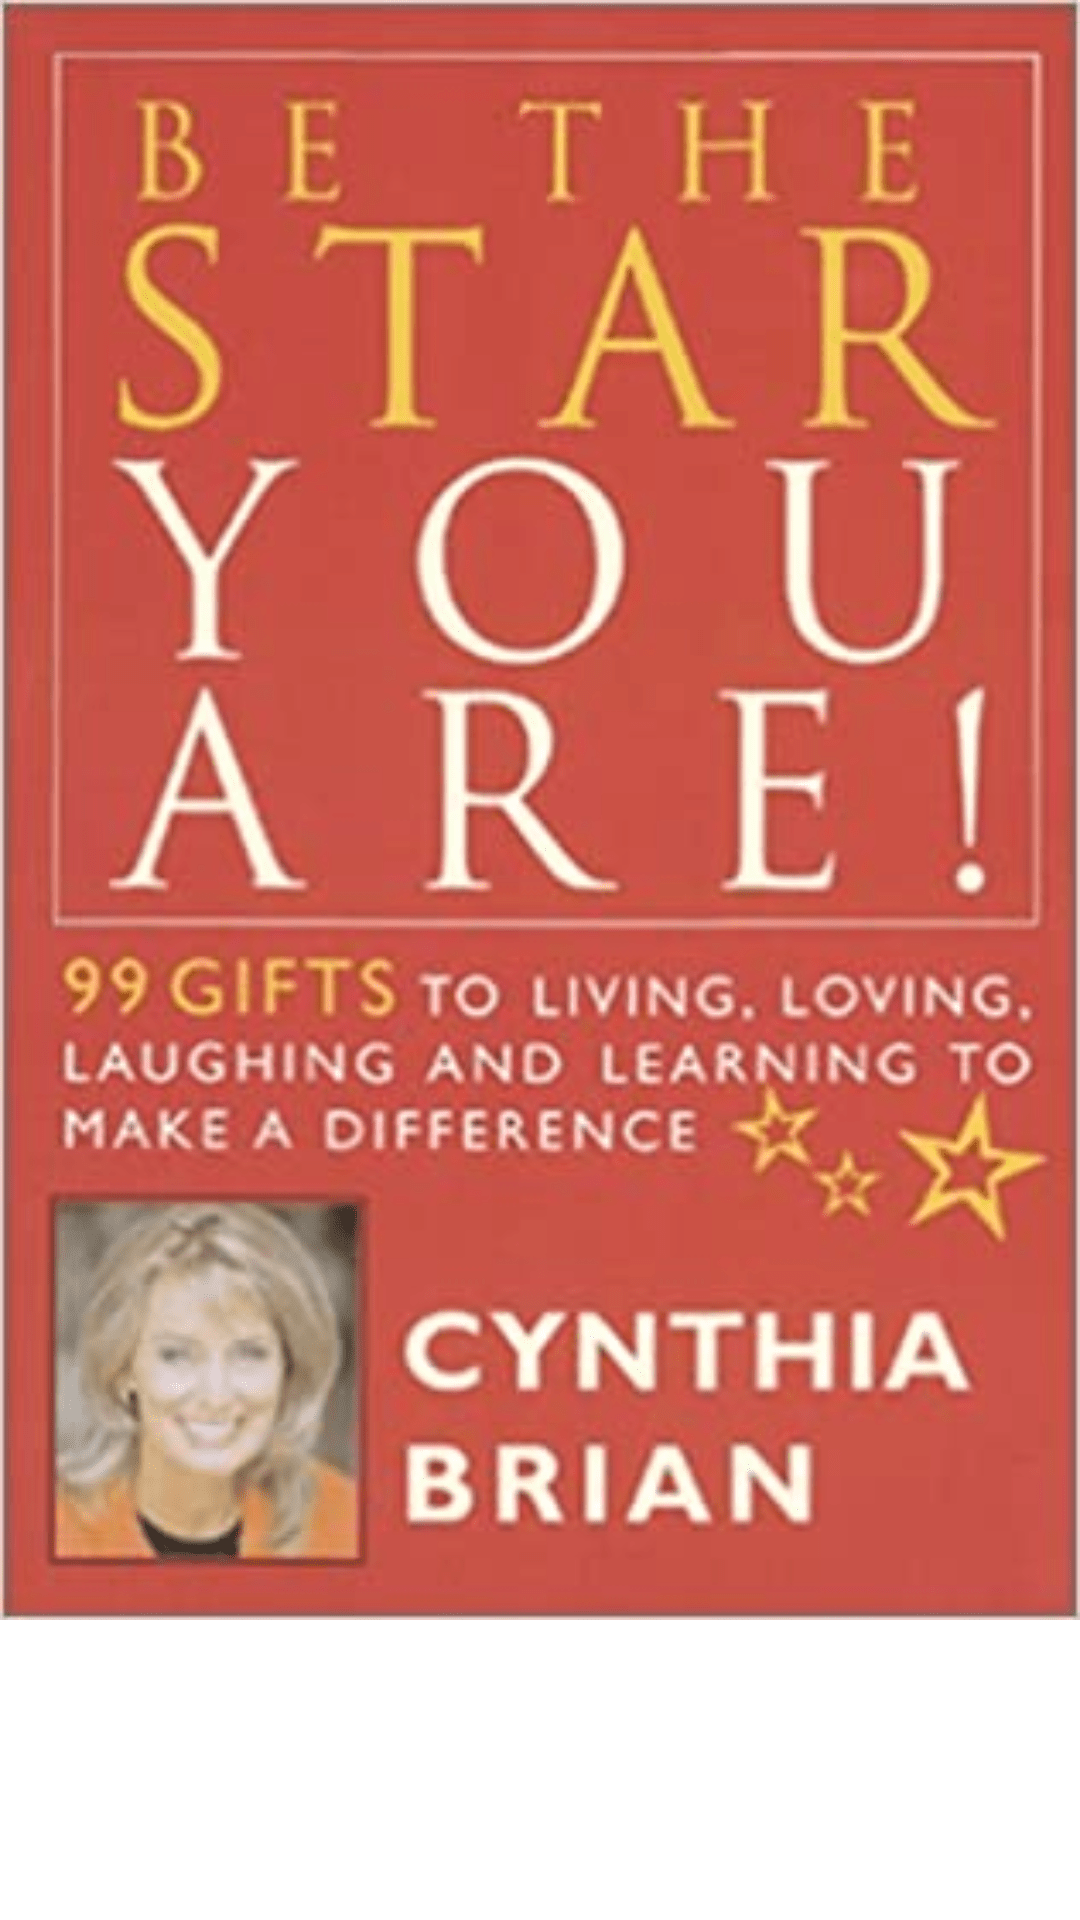 Be the Star You Are!: 99 Gifts to Living, Loving, Laughing, and Learning to Make a Difference